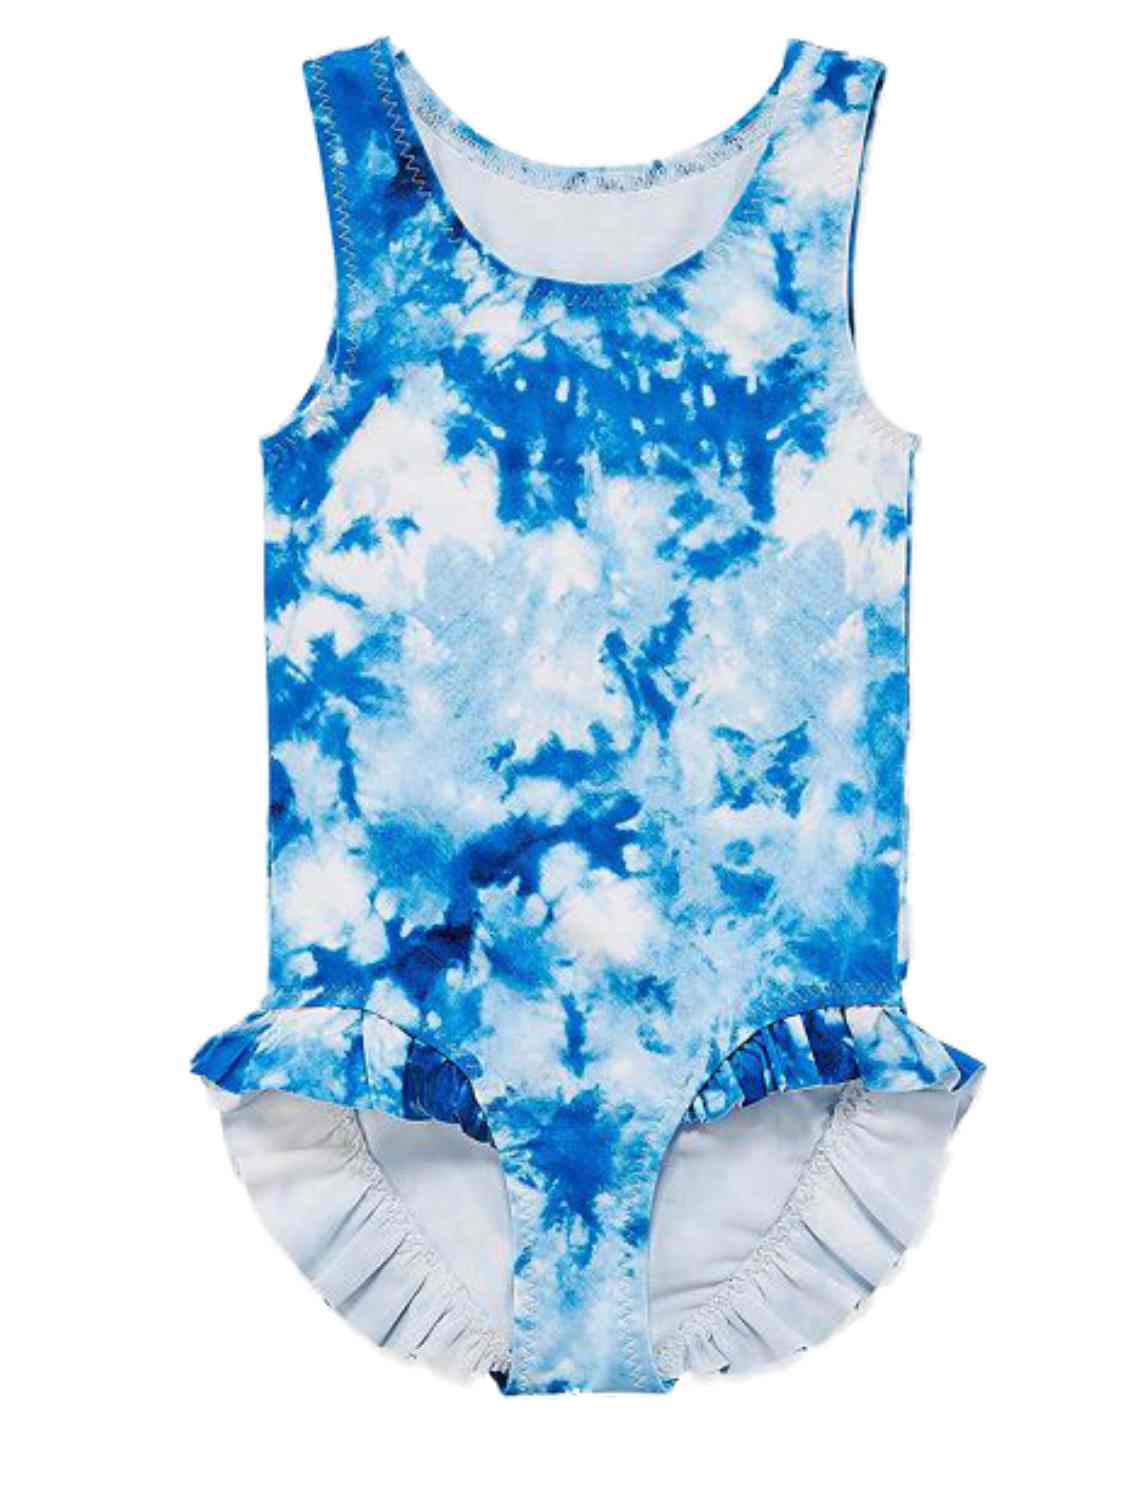 NWT Baby Gap Blue White Tie Dye Print Two Piece Swimsuit Toddler Girl